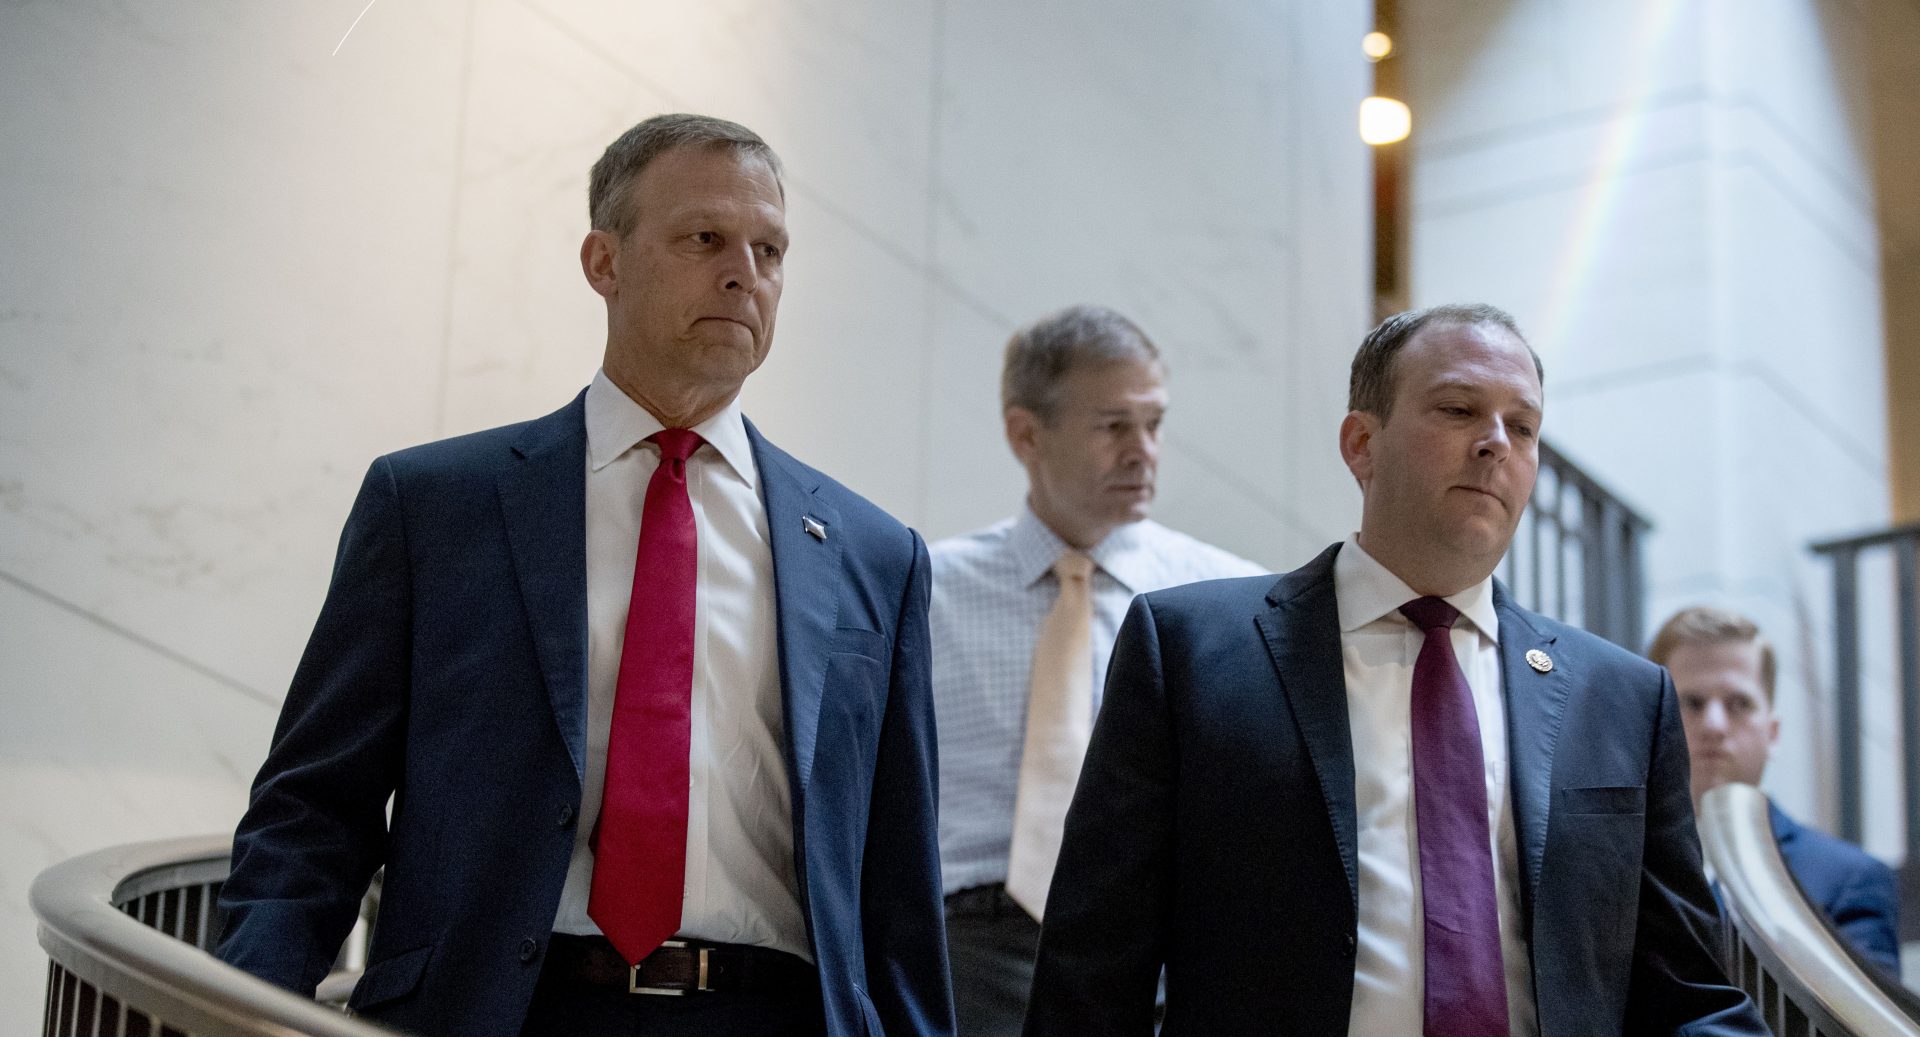 Republican lawmakers, from left, Rep. Scott Perry, R-Pa., Rep. Jim Jordan, R-Ohio, ranking member of the Committee on Oversight Reform, and Rep. Lee Zeldin R-N.Y., arrive for a closed door meeting on Capitol Hill in Washington, Monday, Oct. 14, 2019, where former White House advisor on Russia, Fiona Hill, is scheduled to testify before congressional lawmakers as part of the House impeachment inquiry into President Donald Trump. 